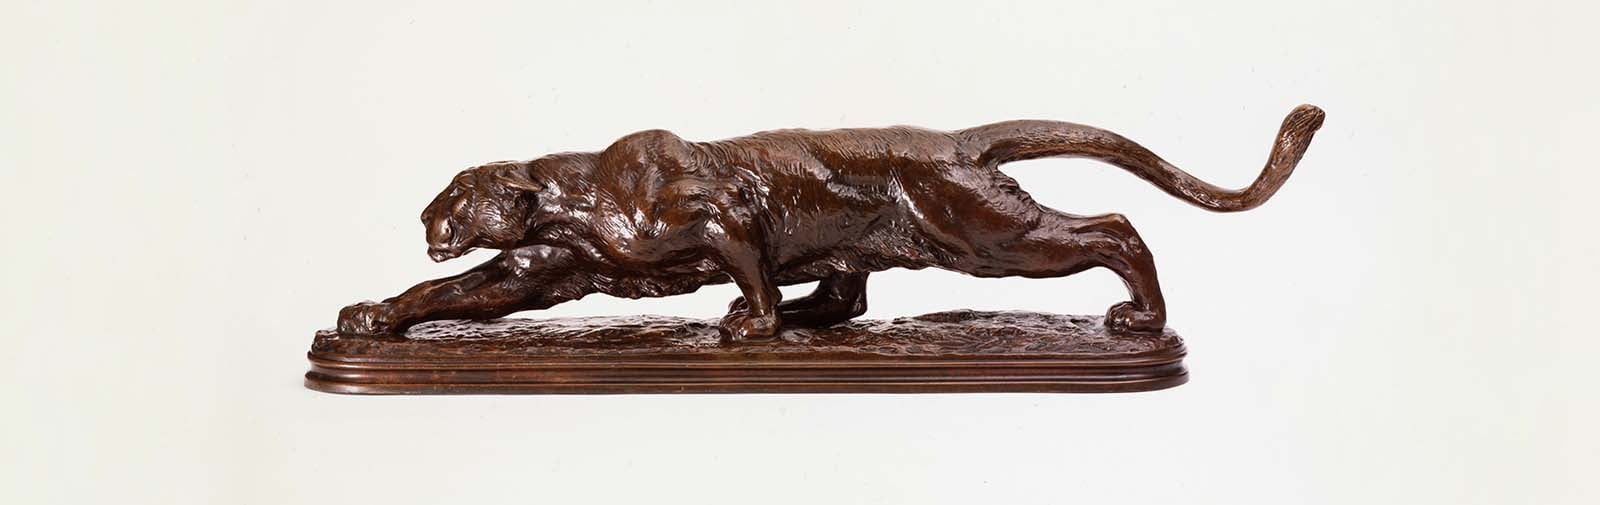 Alexander Phimister Proctor (1860-1950). "Panther," modeled 1891-1892, cast ca. 1893. Bronze, 37.25 x 9.75 x 6.5 inches. Gift of A. Phimister Proctor Museum, with special thanks to Sandy and Sally Church. 4.08.1